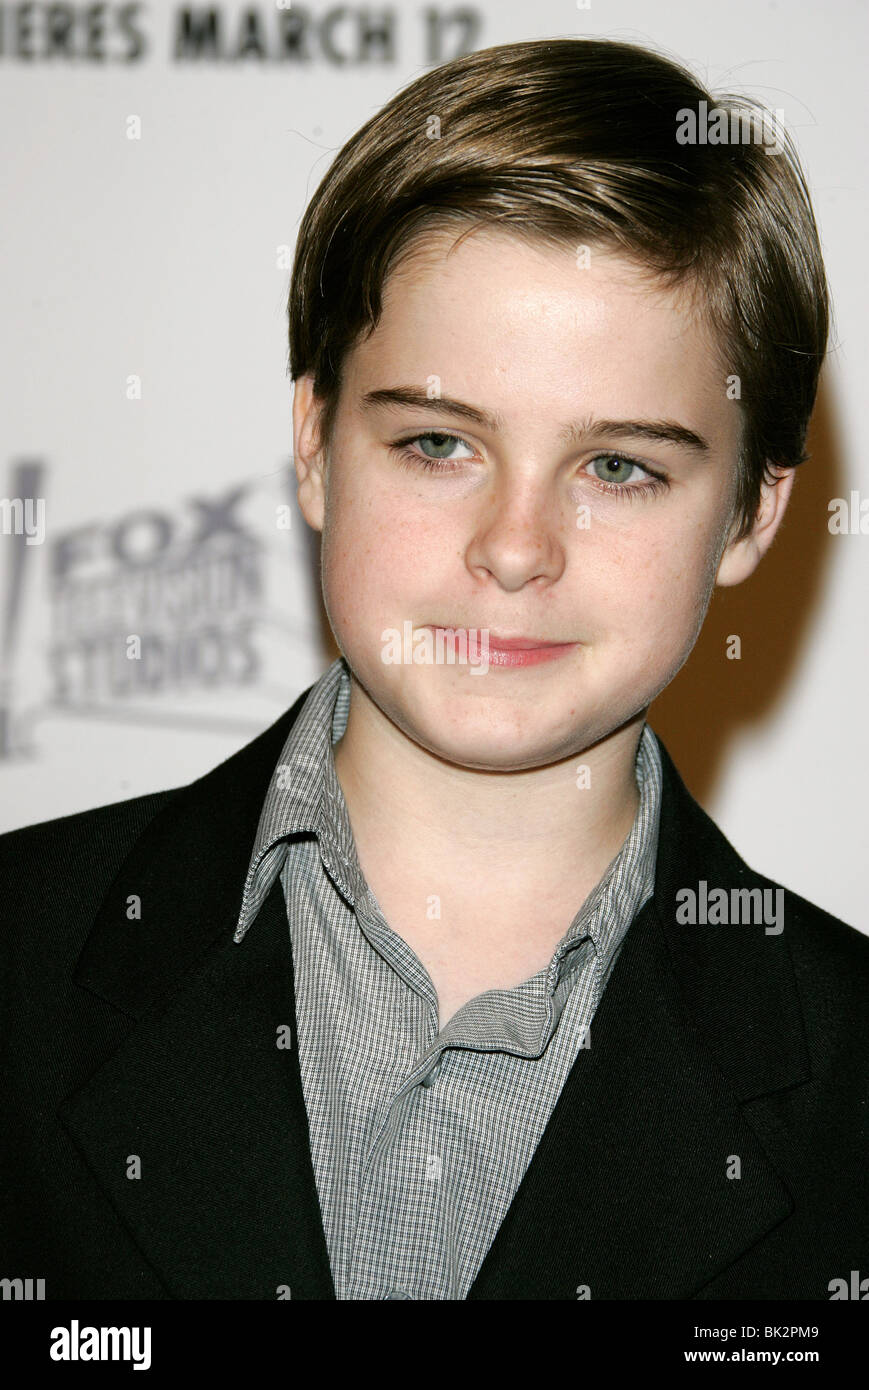 AIDAN MITCHELL THE RICHES TV PREMIERE CENTURY CITY LOS ANGELES USA 10 March 2007 Stock Photo